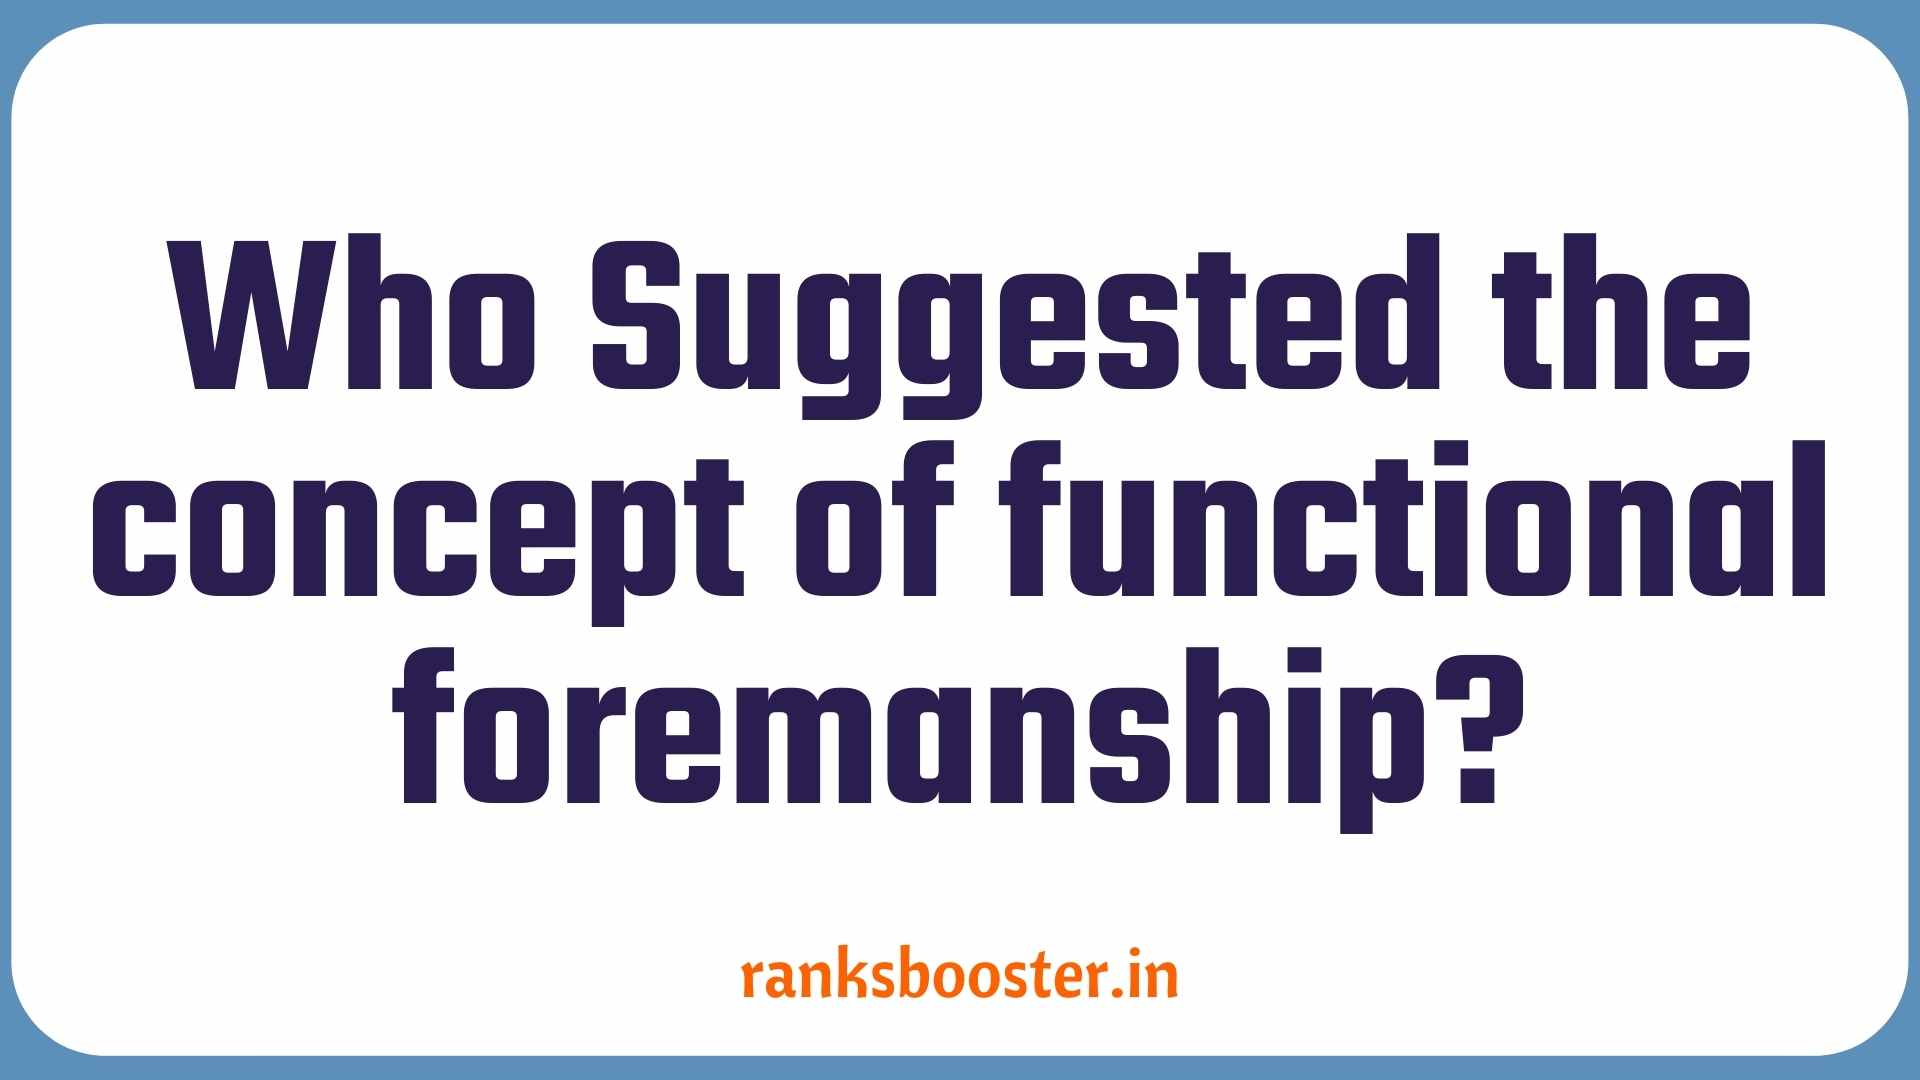 Who Suggested the concept of functional foremanship?